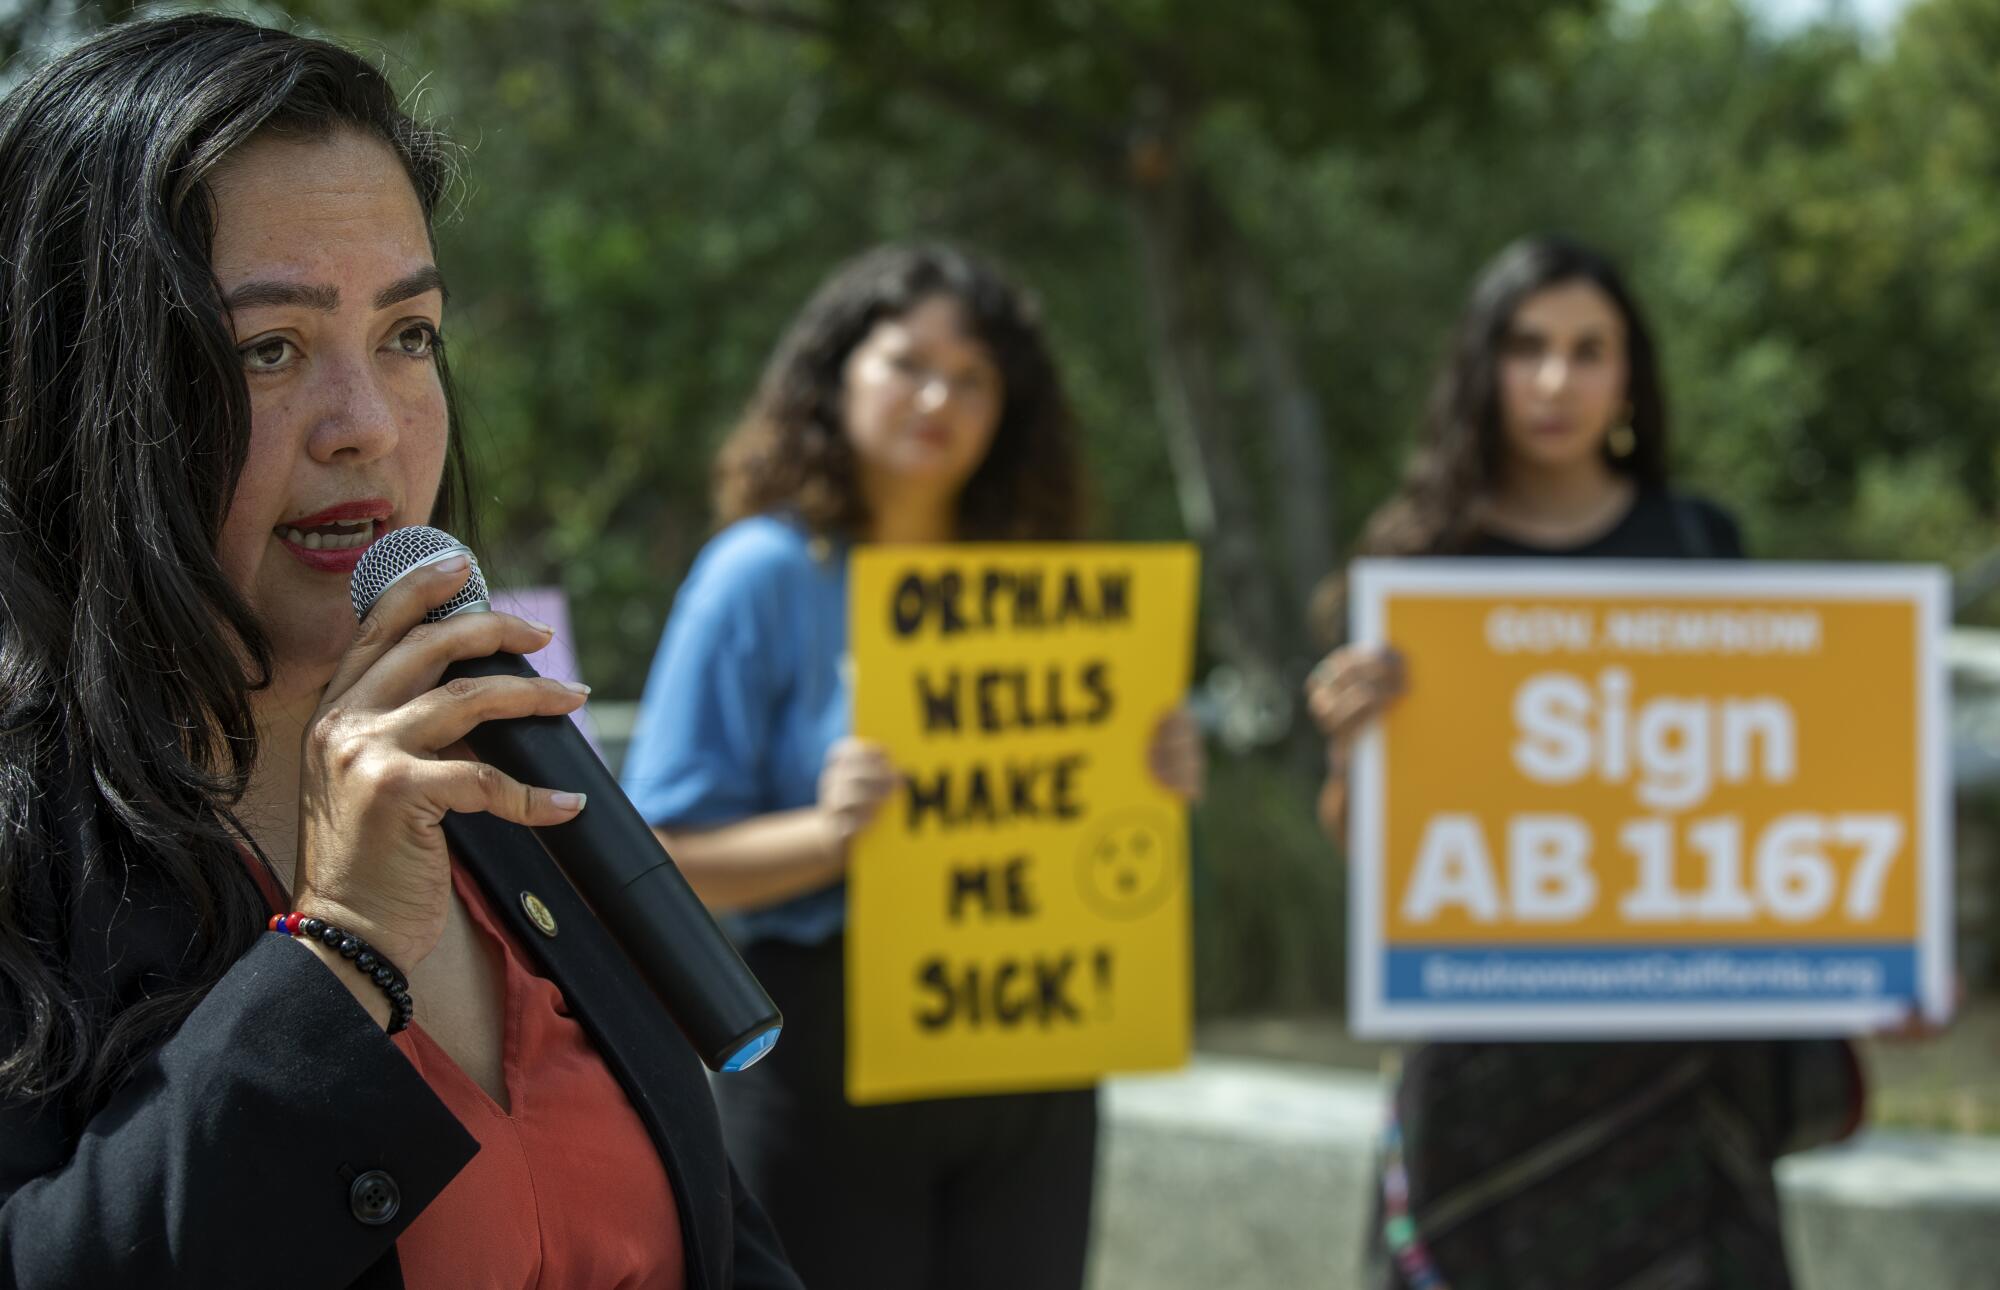 A woman speaks into a microphone as two other women hold signs.